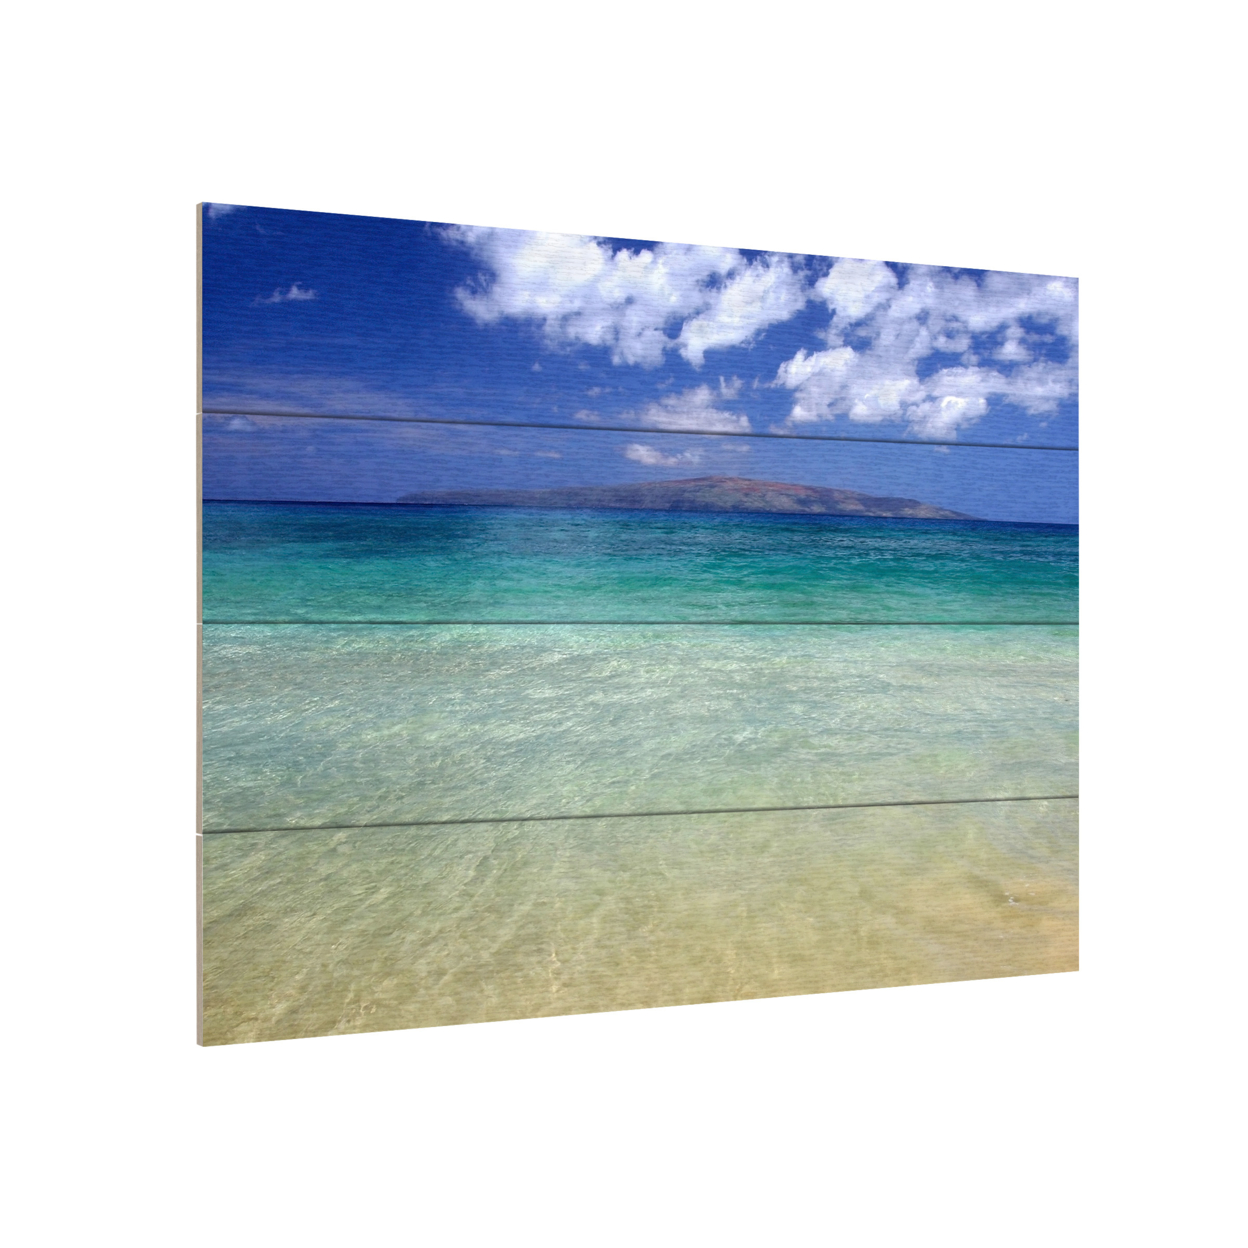 Wall Art 12 X 16 Inches Titled Hawaii Blue Beach Ready To Hang Printed On Wooden Planks